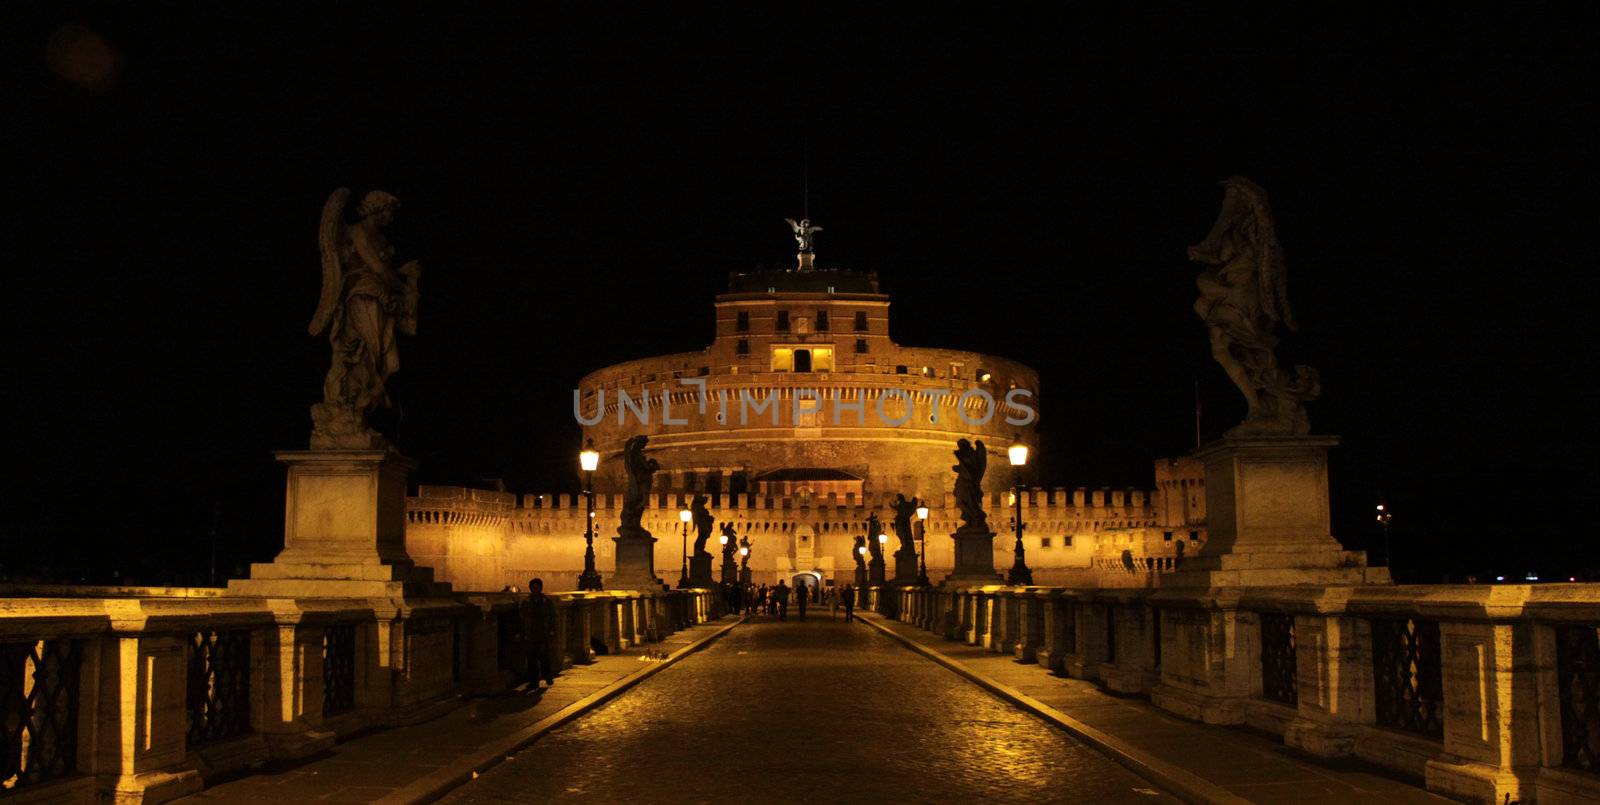 The towering Castel Sant'Angelo (Mausoleum of Hadrian) in Rome, Italy.  Shot at night from Ponte Sant Angelo.
